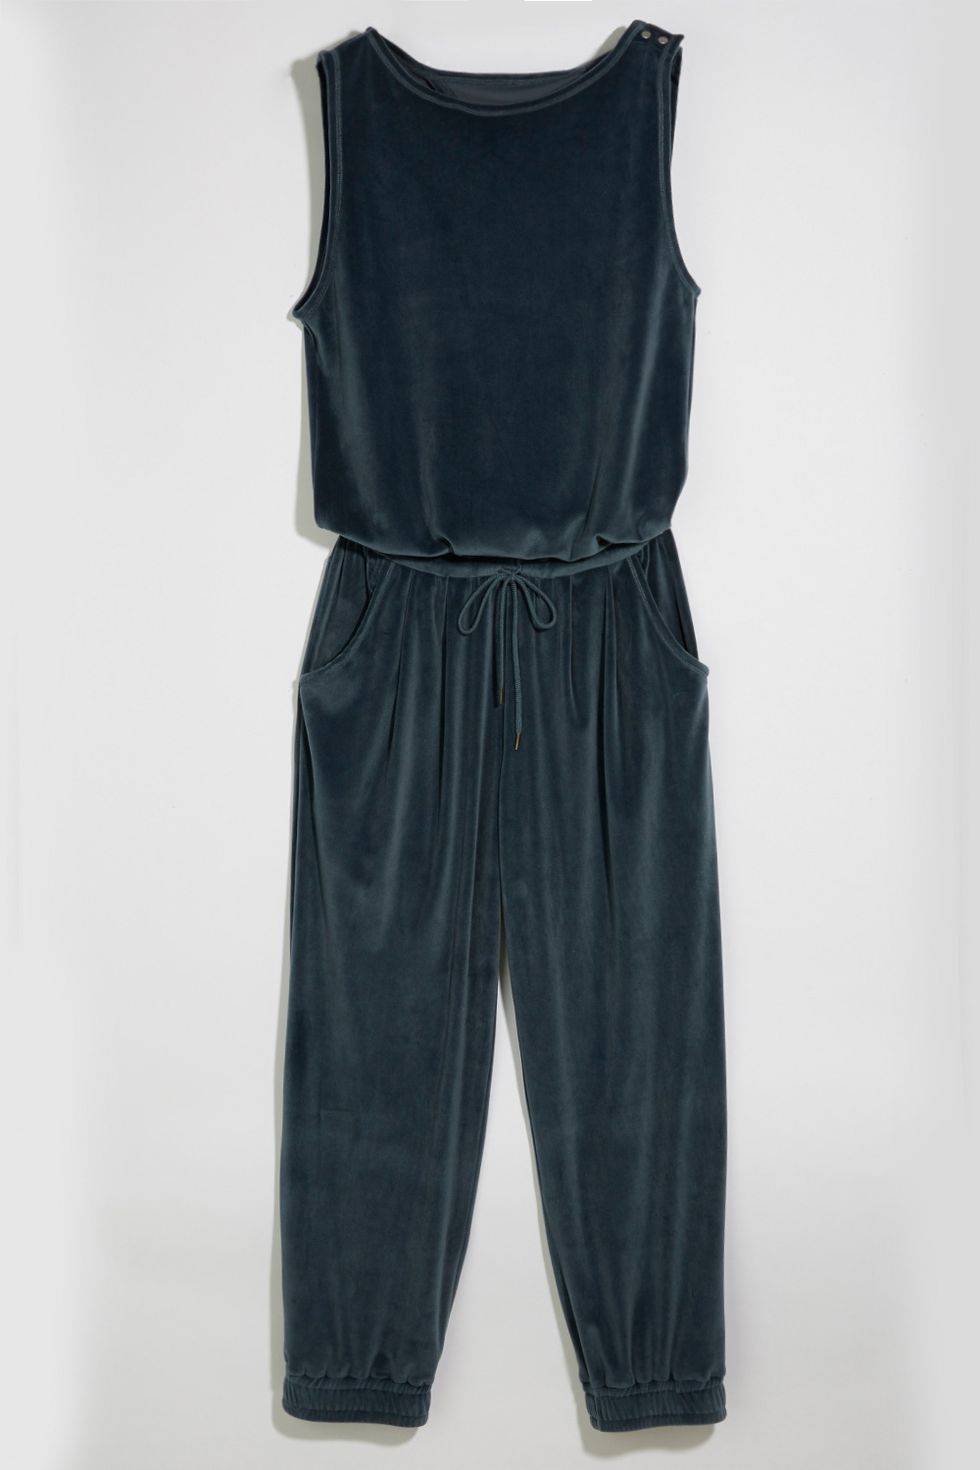 Clothing, Black, One-piece garment, Overall, Dress, Trousers, Sleeve, Denim, 